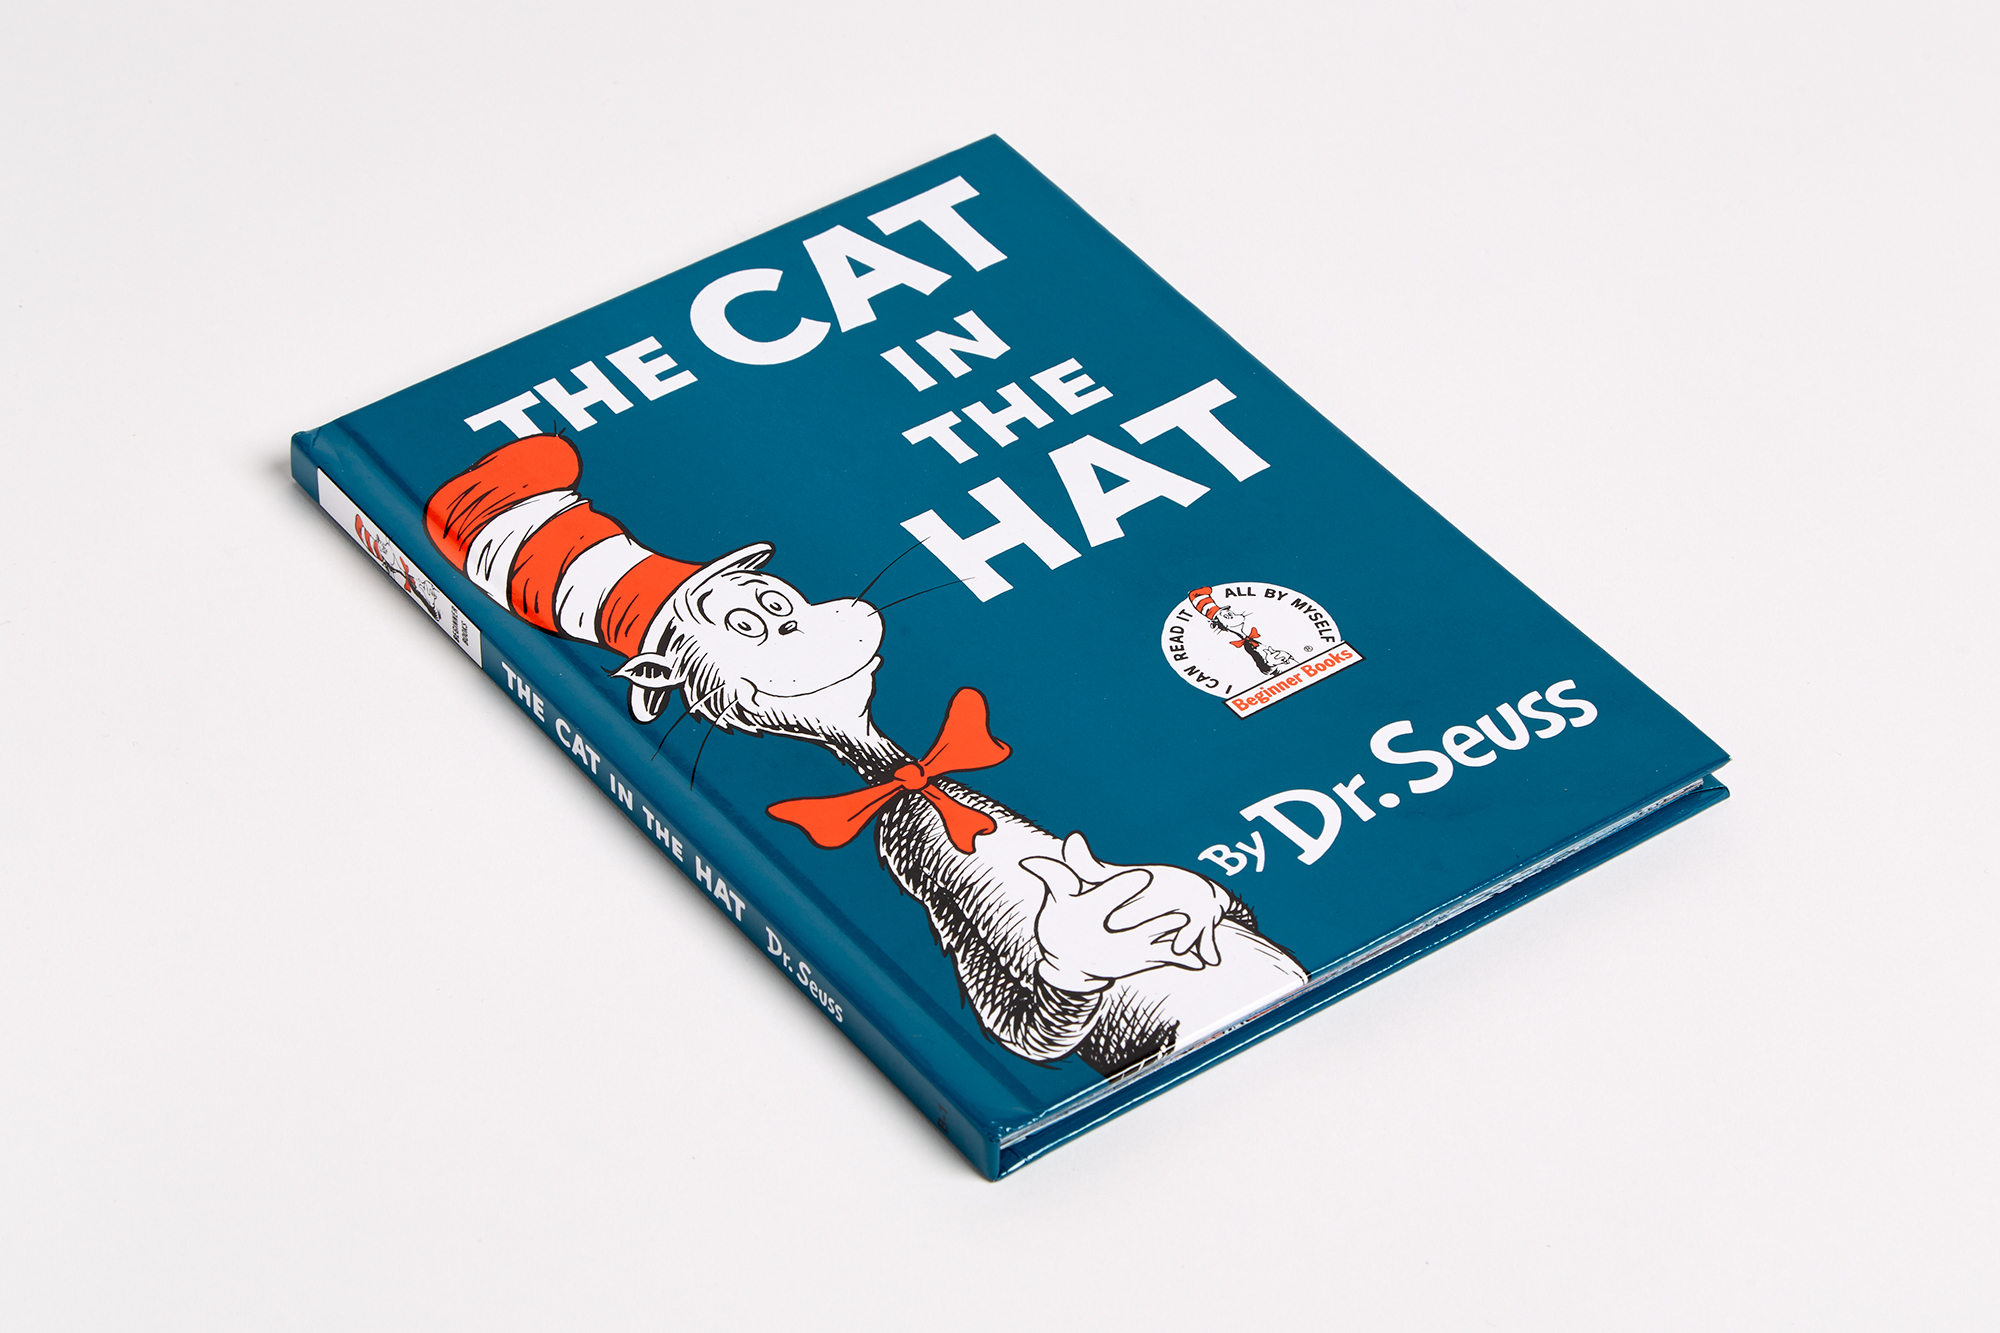 Dr. Seuss's Beginner Book Boxed Set Collection: The Cat in the Hat